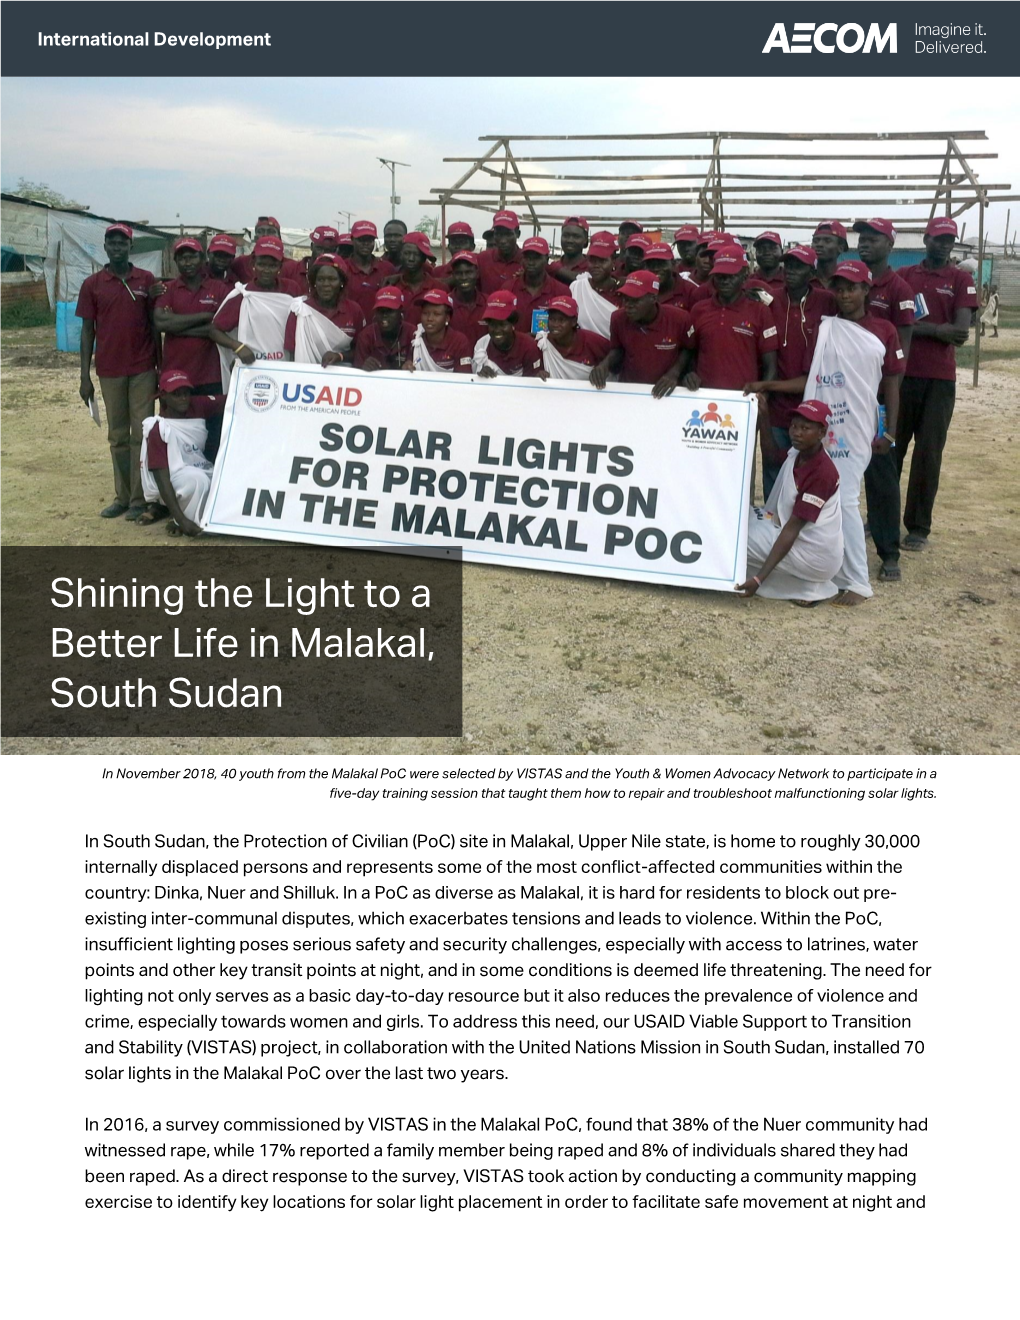 Shining the Light to a Better Life in Malakal, South Sudan